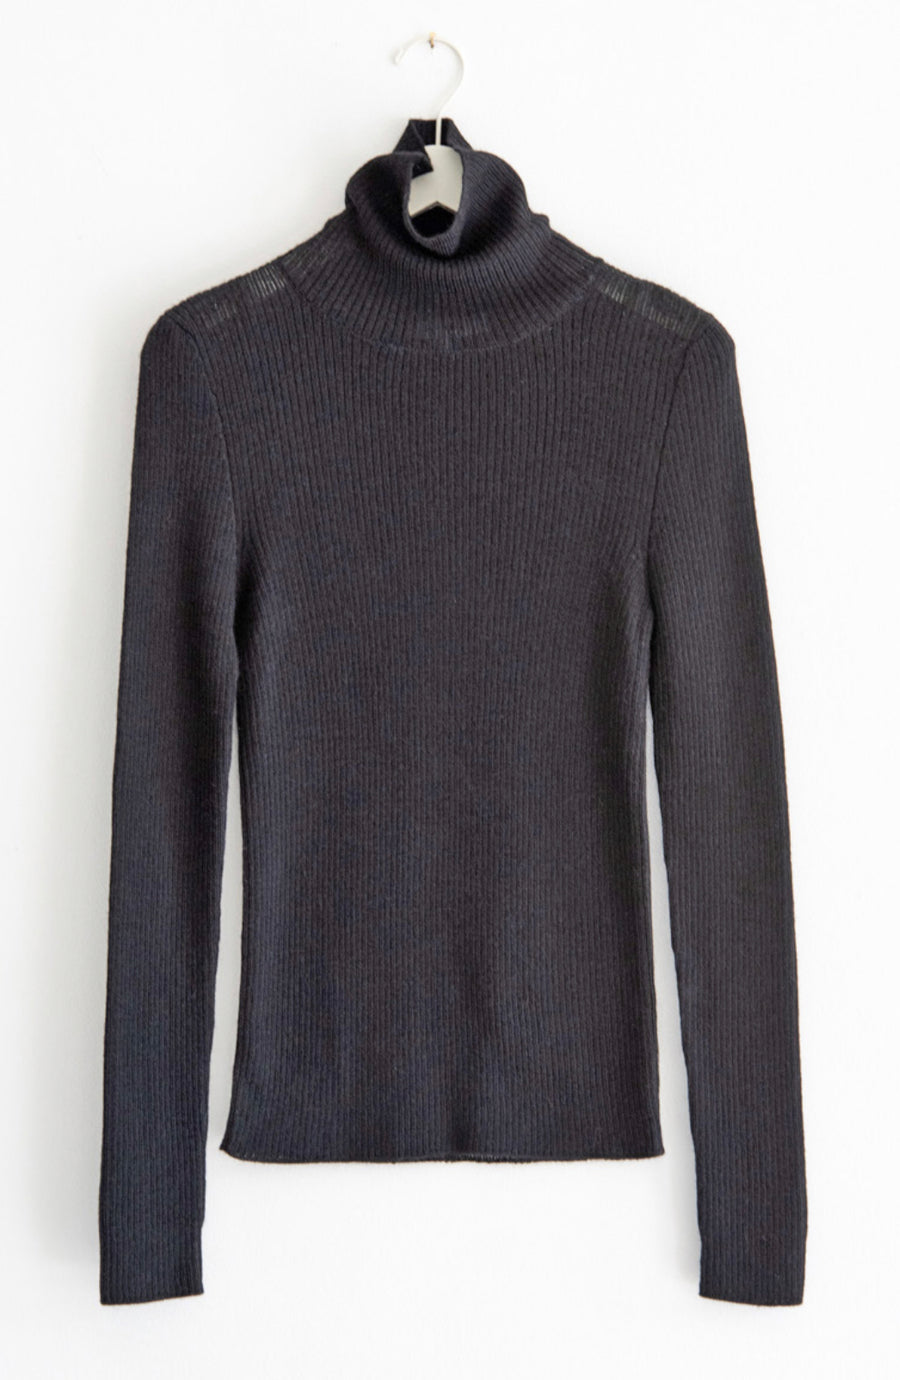 Sweater - The “Essential”  Turtleneck